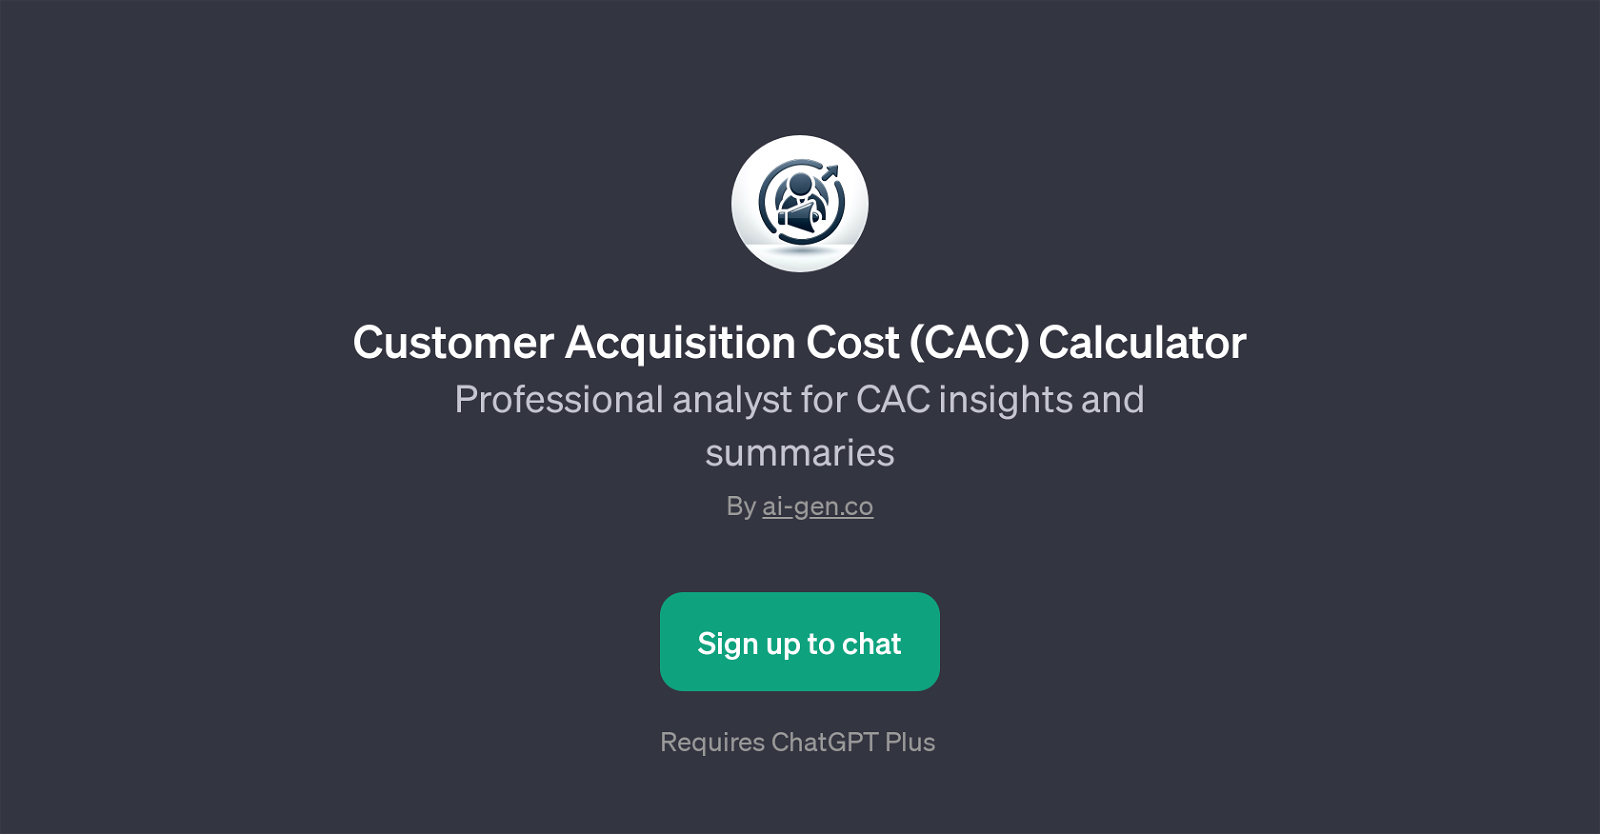 Customer Acquisition Cost (CAC) Calculator website